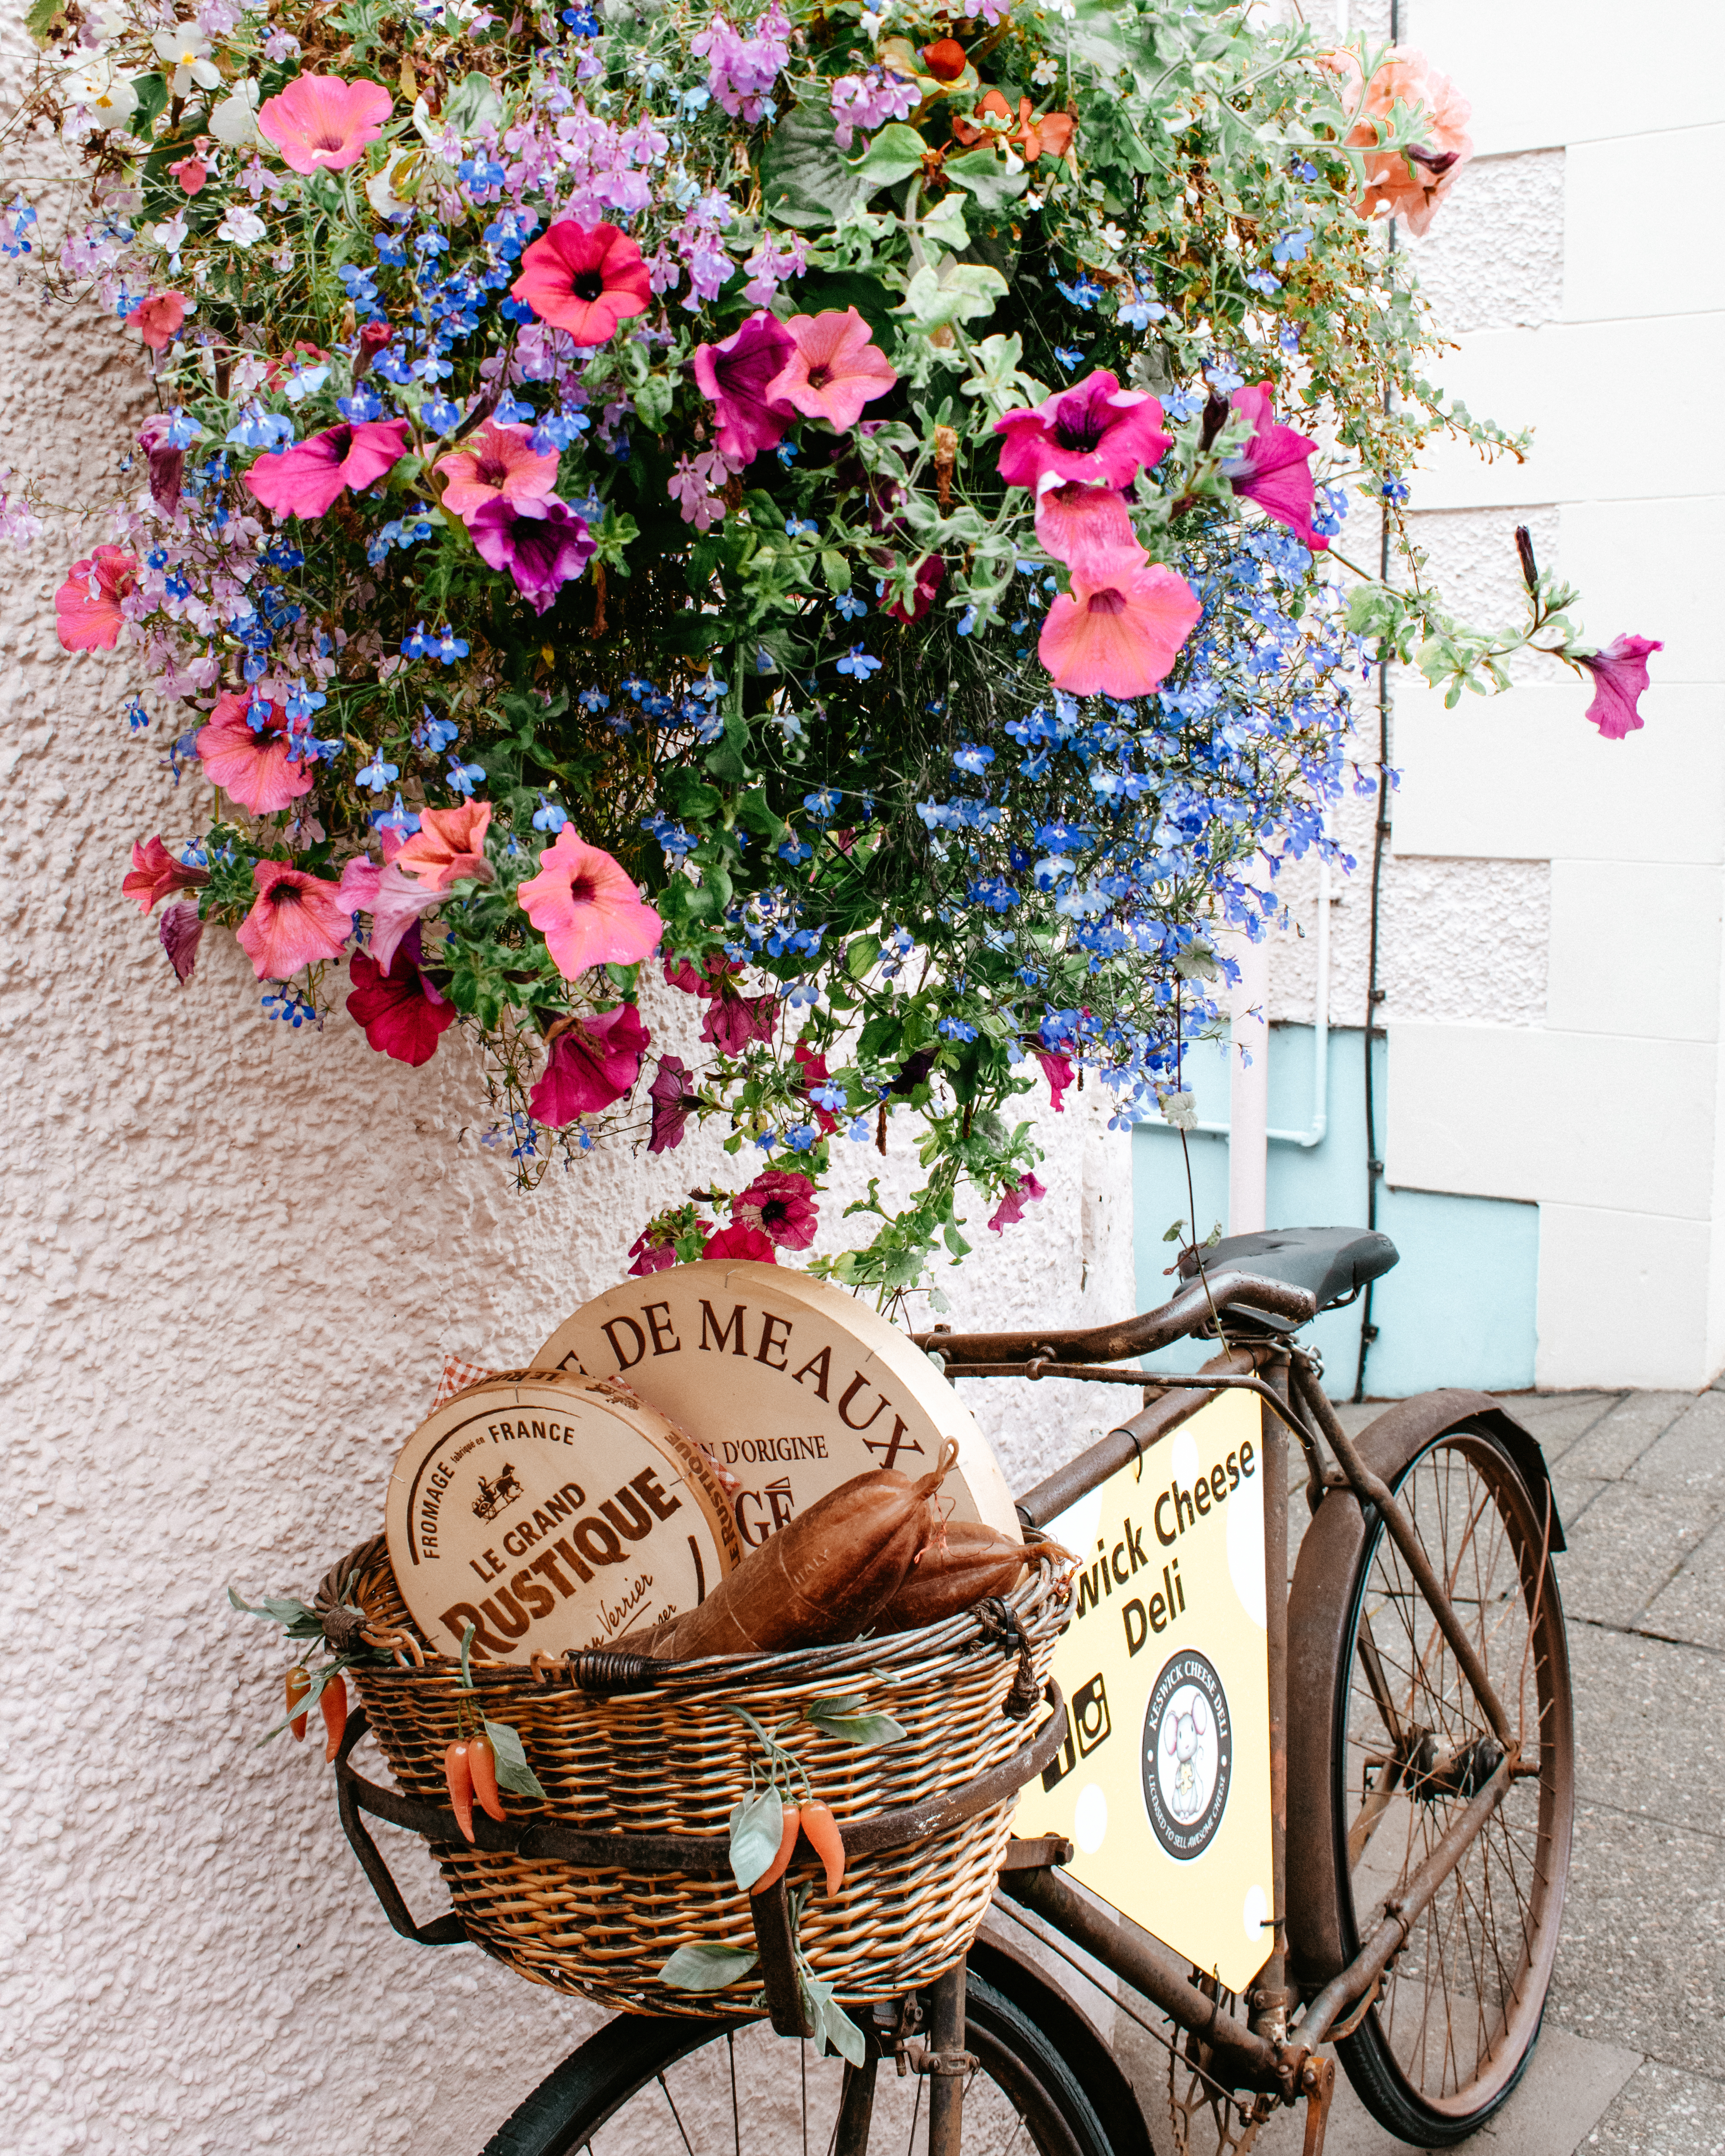 Large flower basket above a bike filled with cheeses outside the Keswick Cheese company